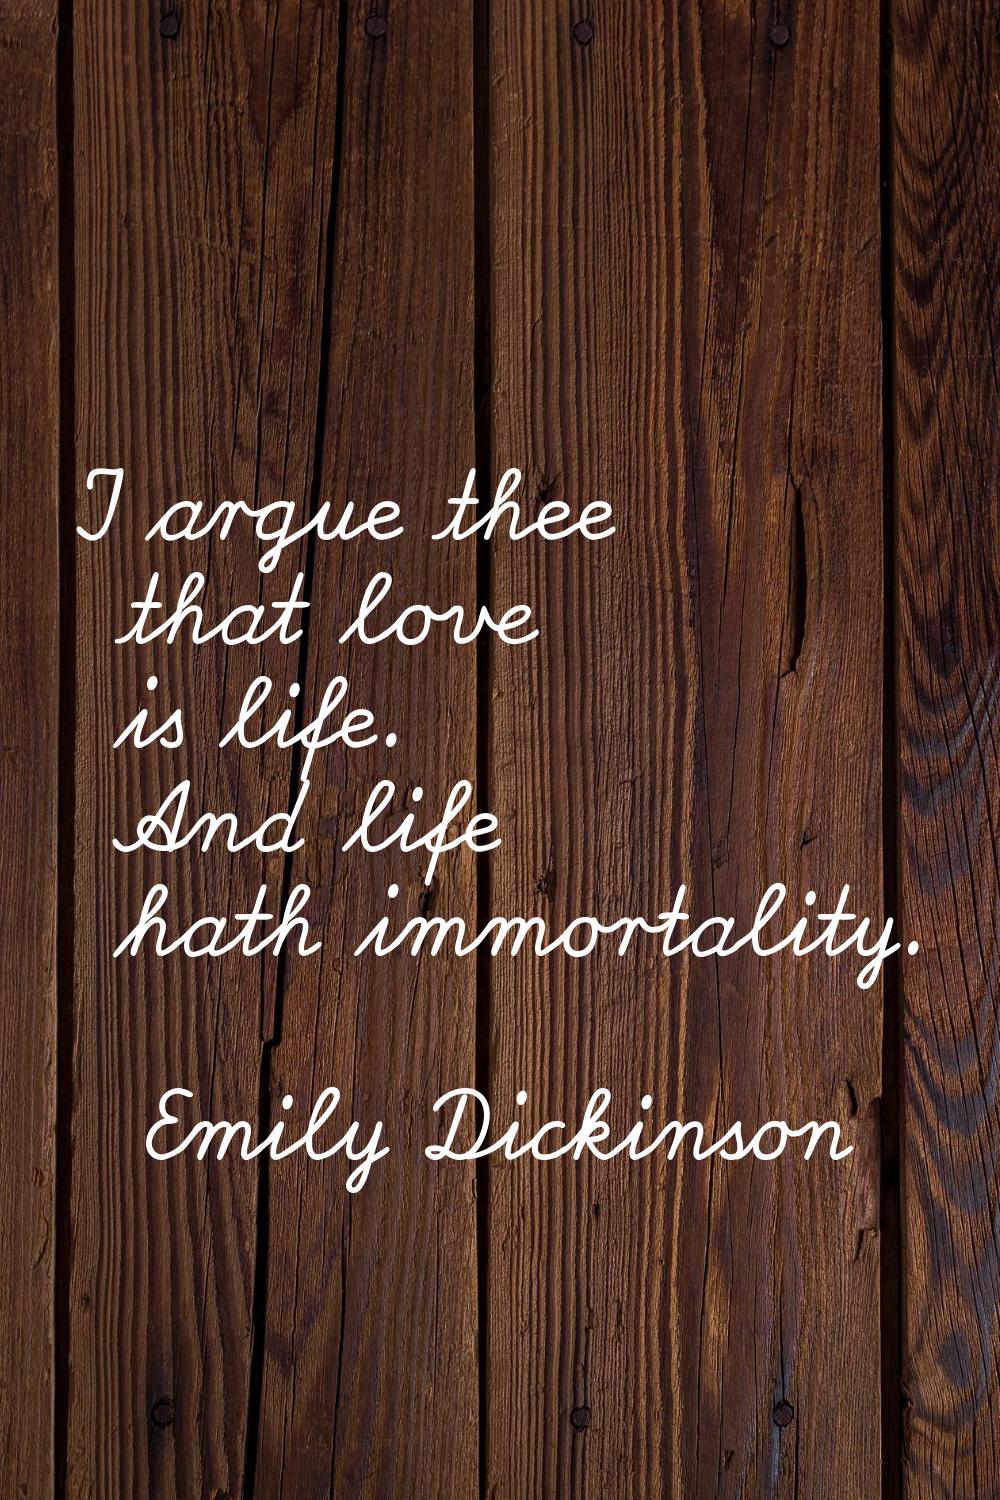 I argue thee that love is life. And life hath immortality.